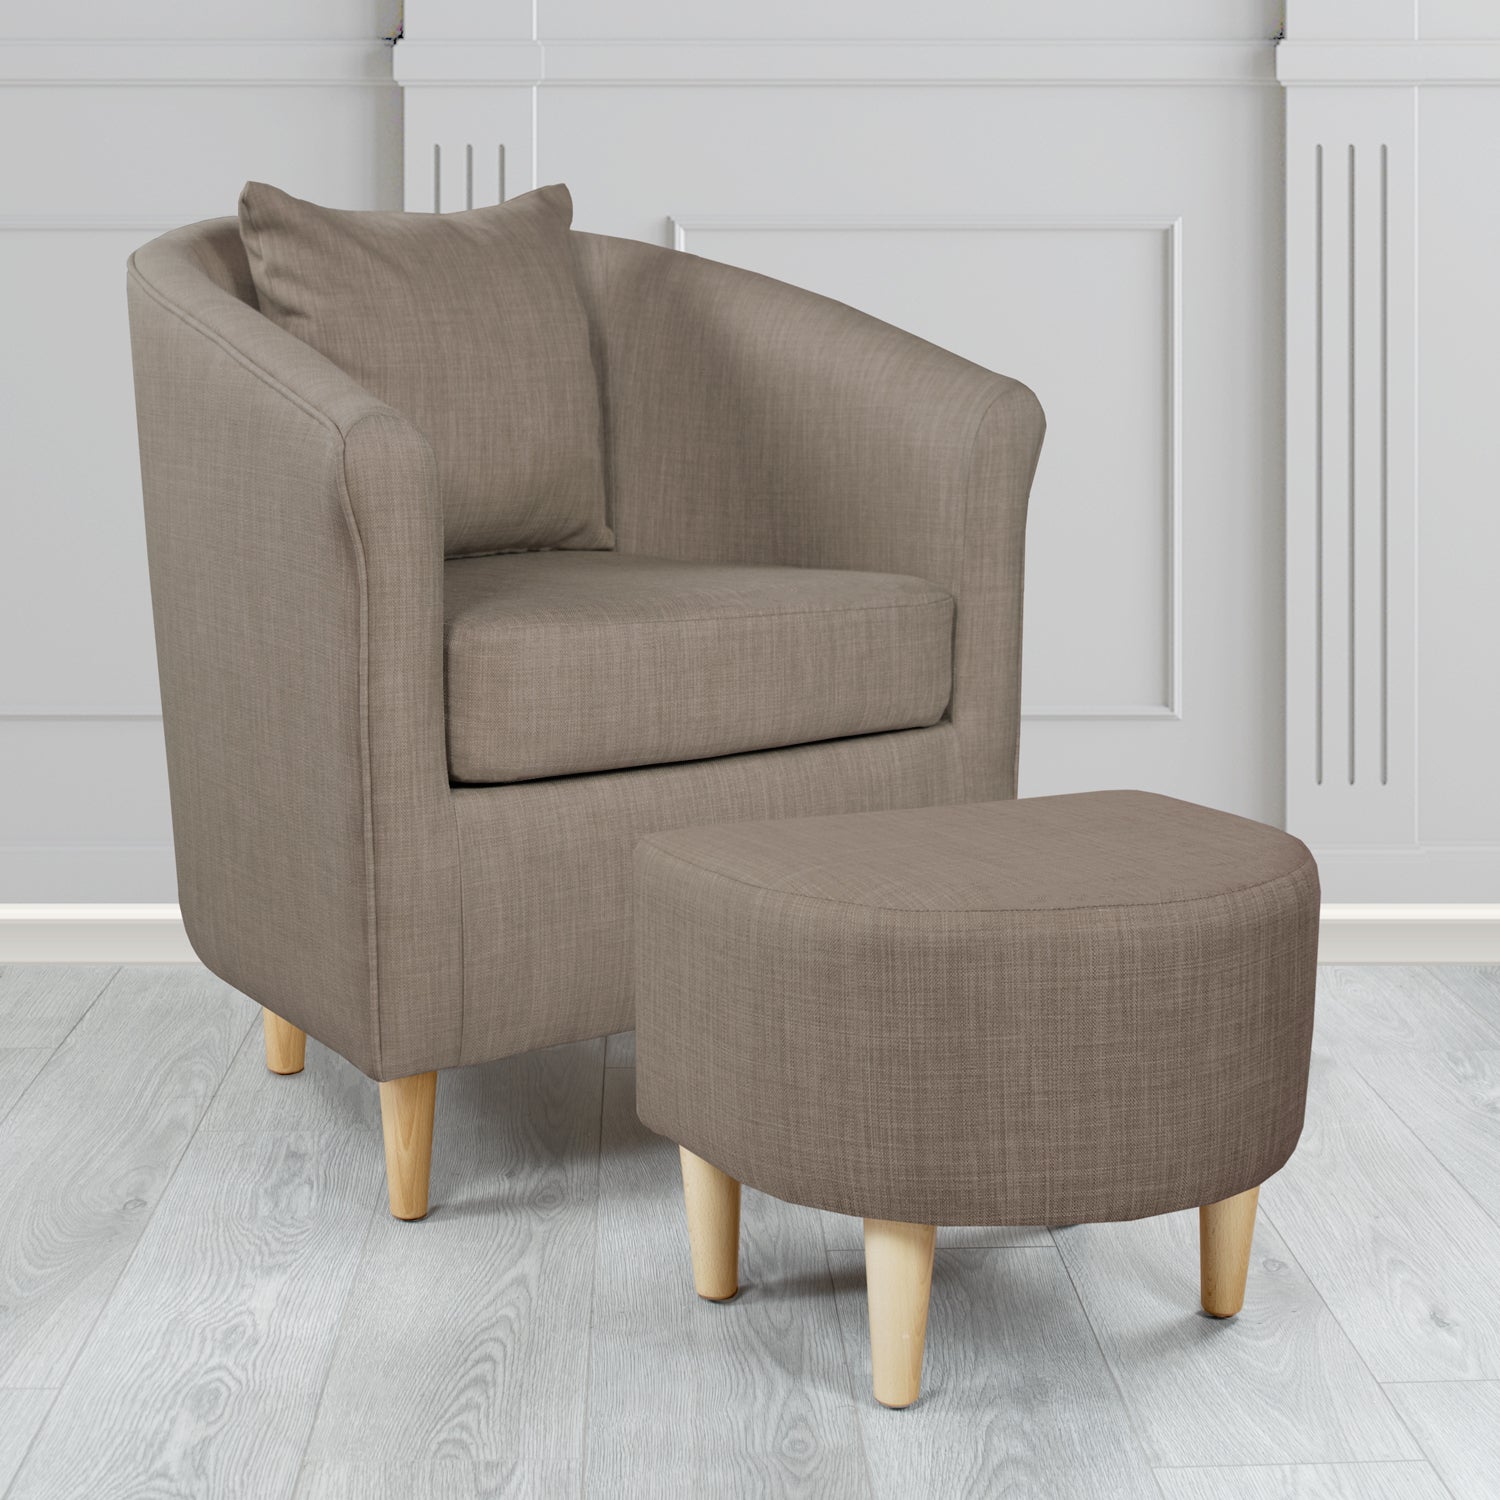 St Tropez Charles Slate Plain Linen Fabric Tub Chair & Footstool Set with Scatter Cushion - The Tub Chair Shop